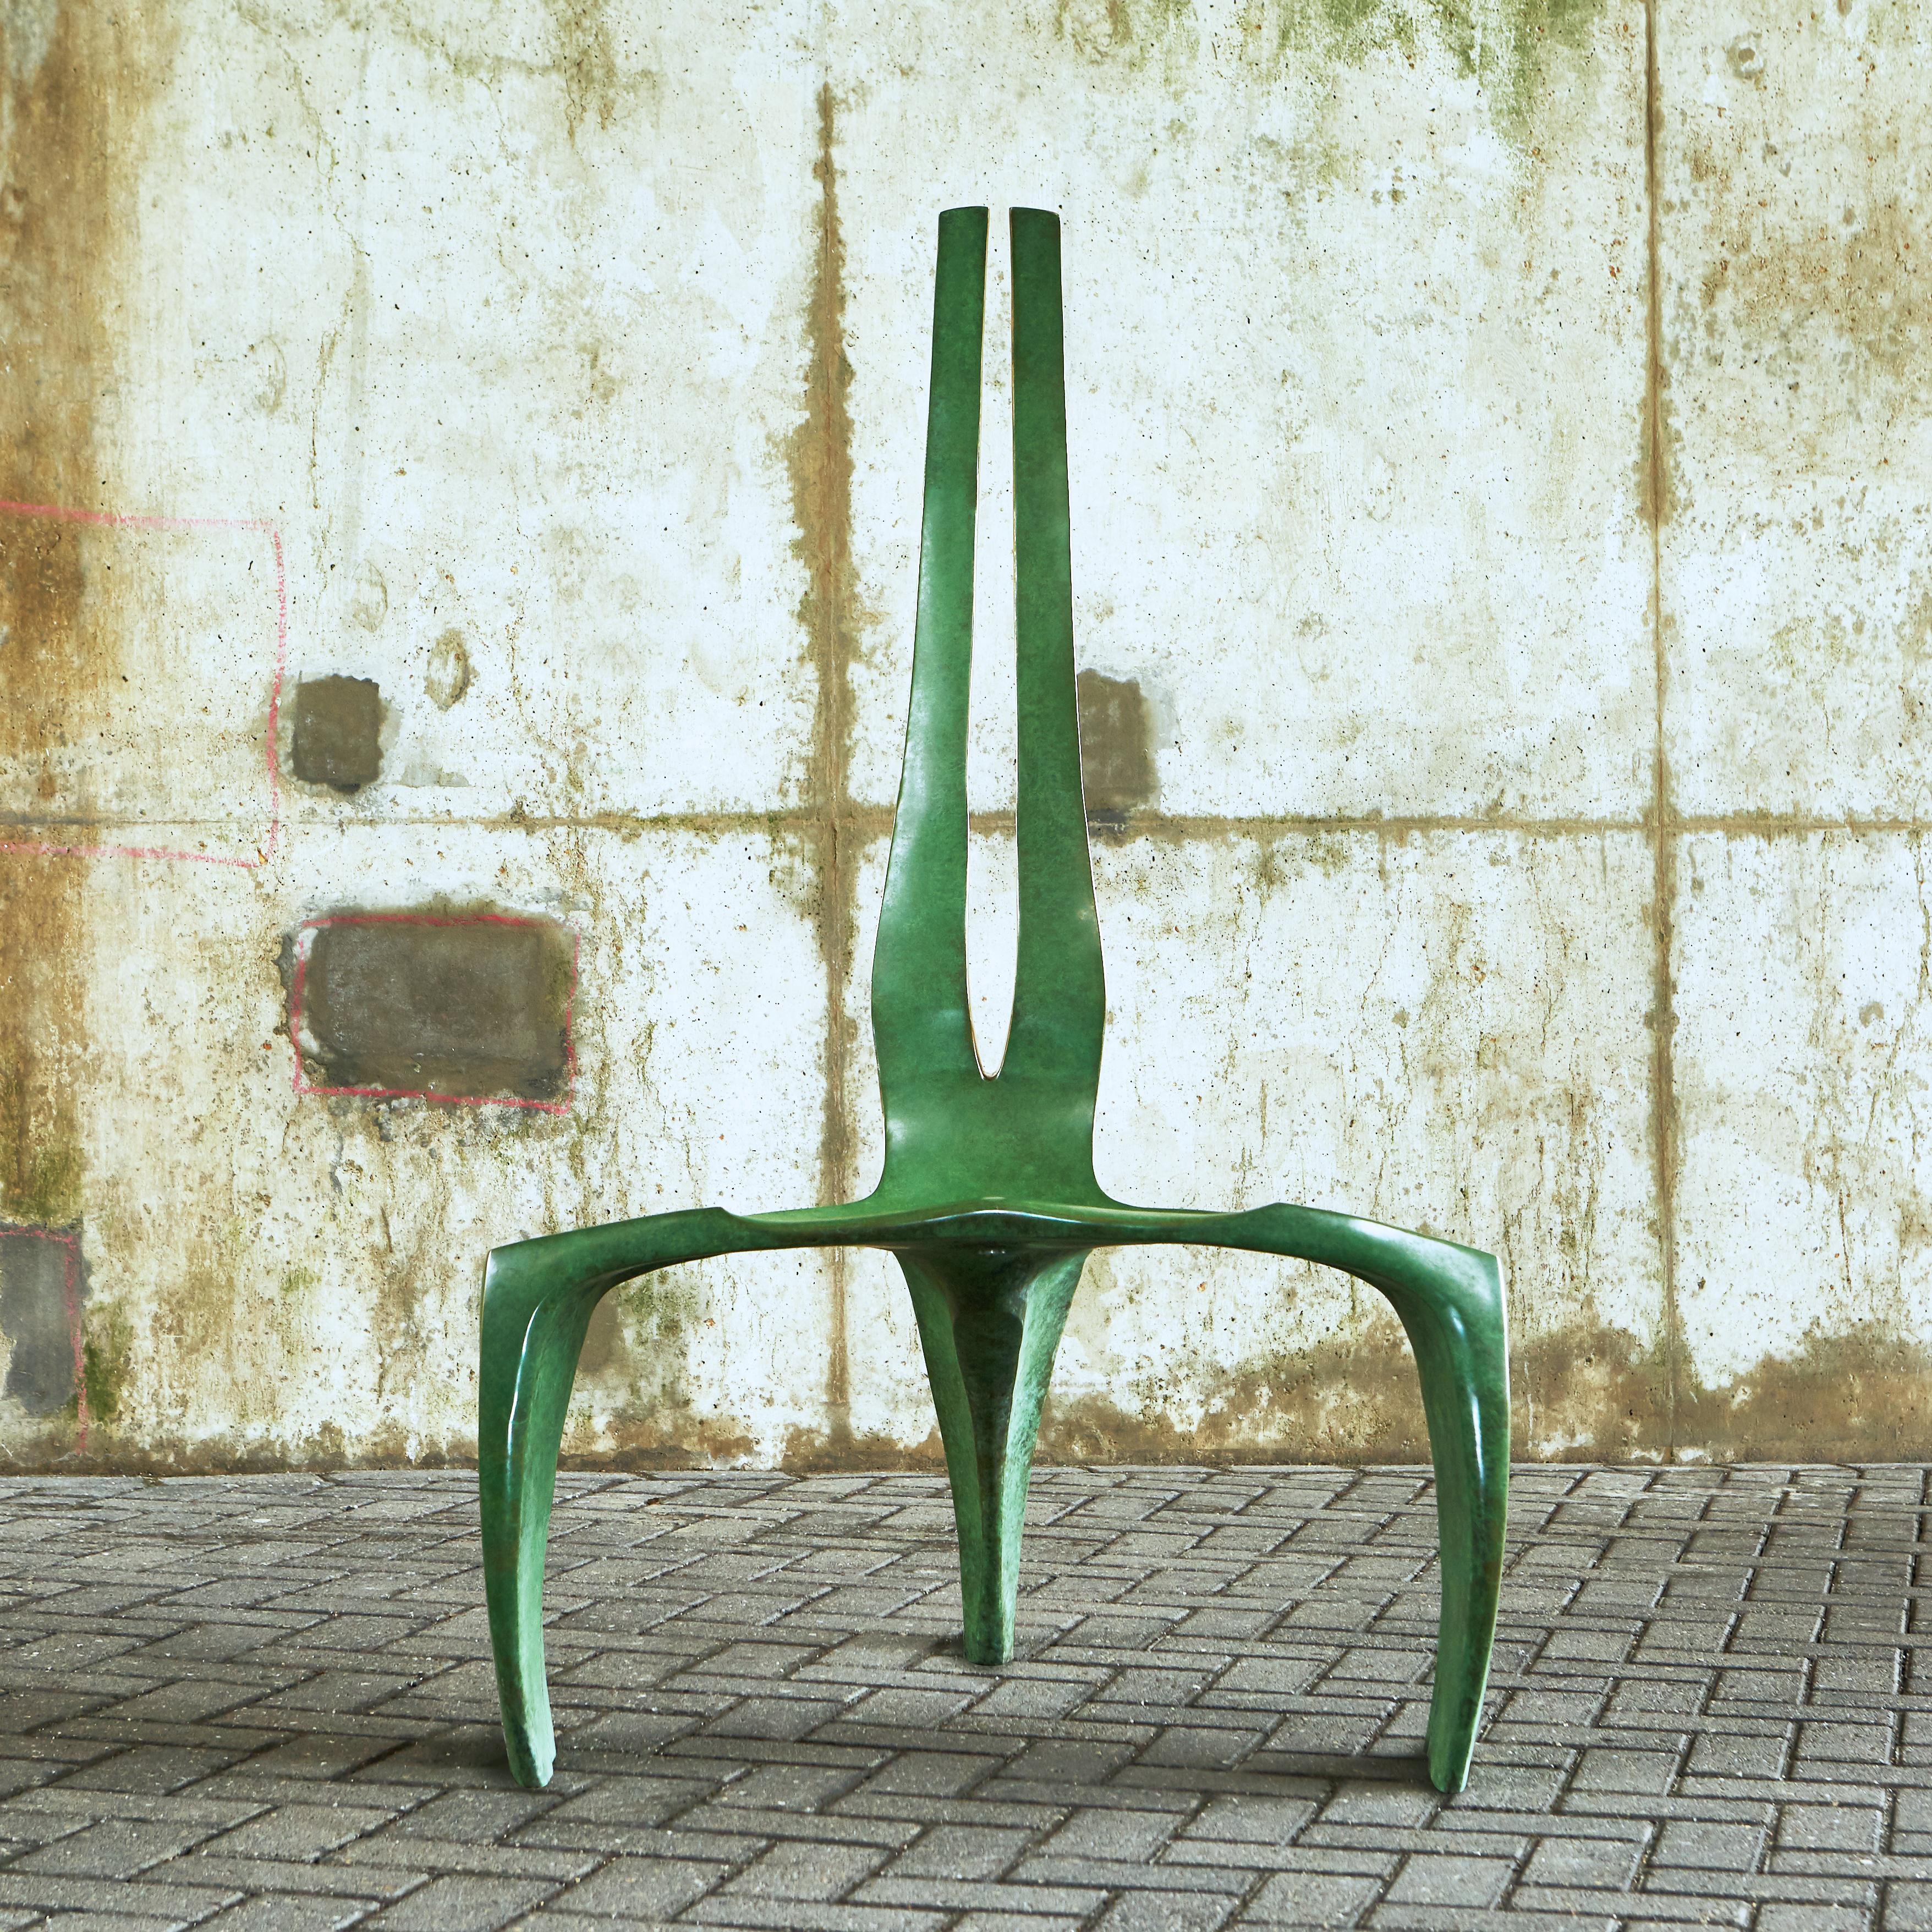 British Contemporary, Green and Unique Bronze Casted Dragon Kre Chair by Alun Heslop For Sale